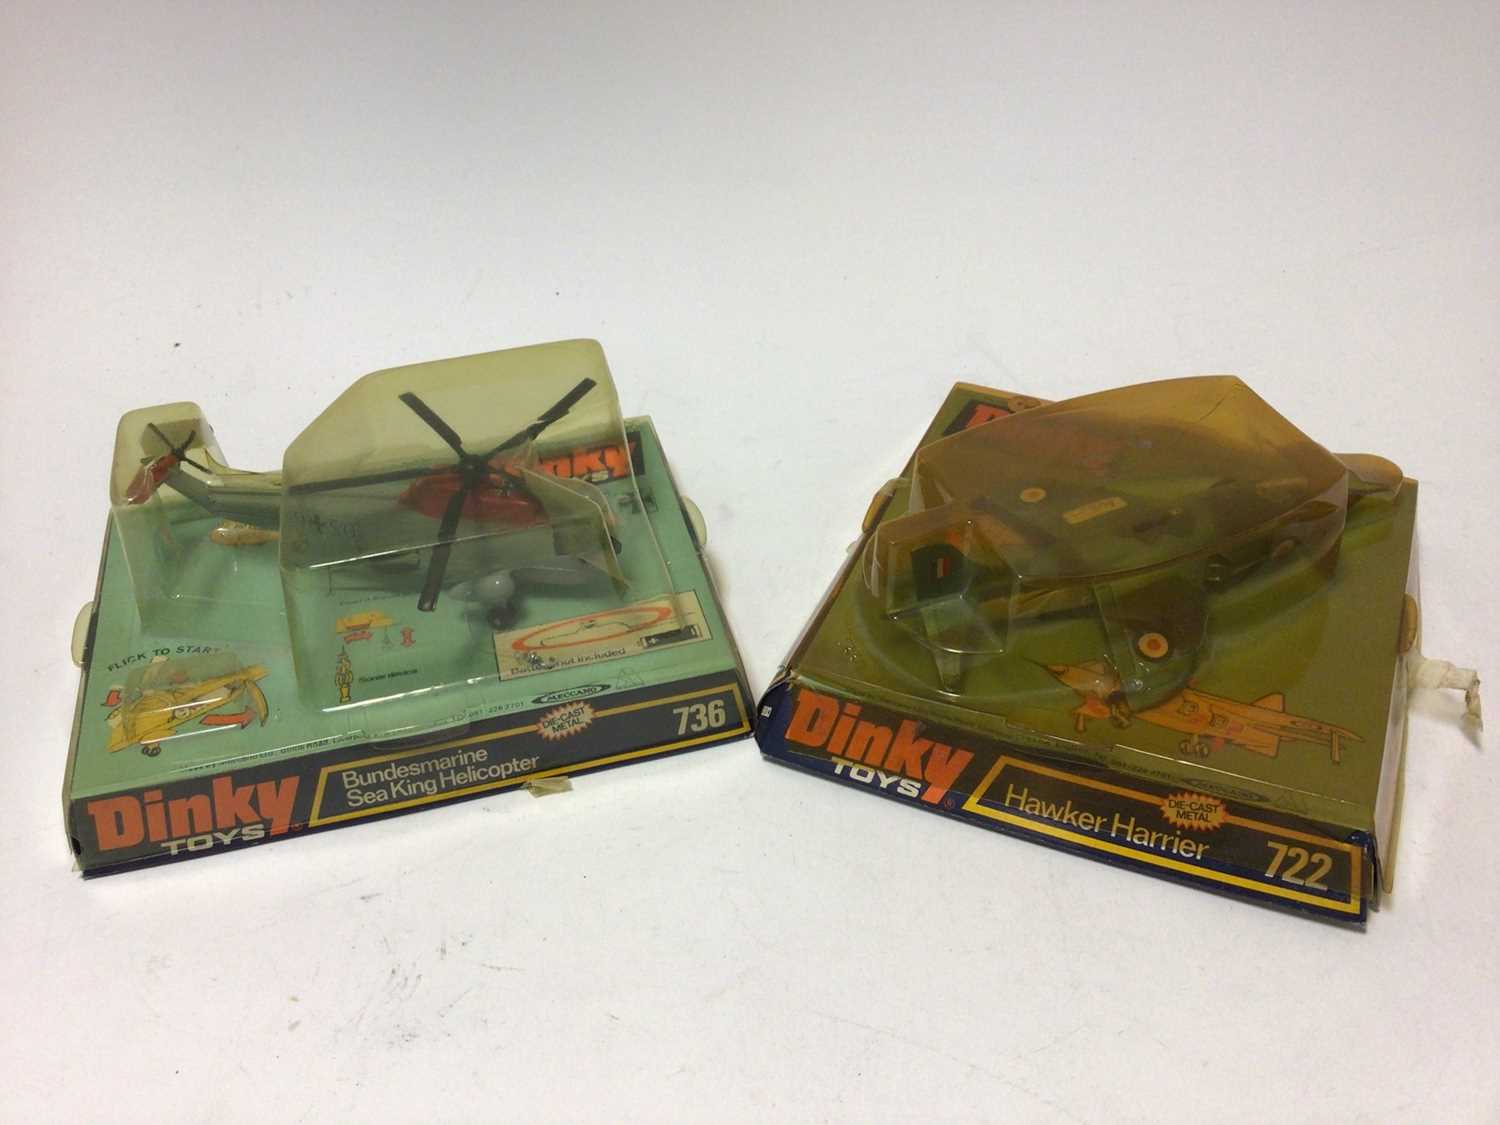 Lot 193 - Dinky Hawker Harrier No.722, Bundesmarine Sea King Helicopter No.736, Jukers JU87B Stuka No.721, Air Sea Resue Launch No.678 and DUKW Amphibian No.681, all boxed (5)